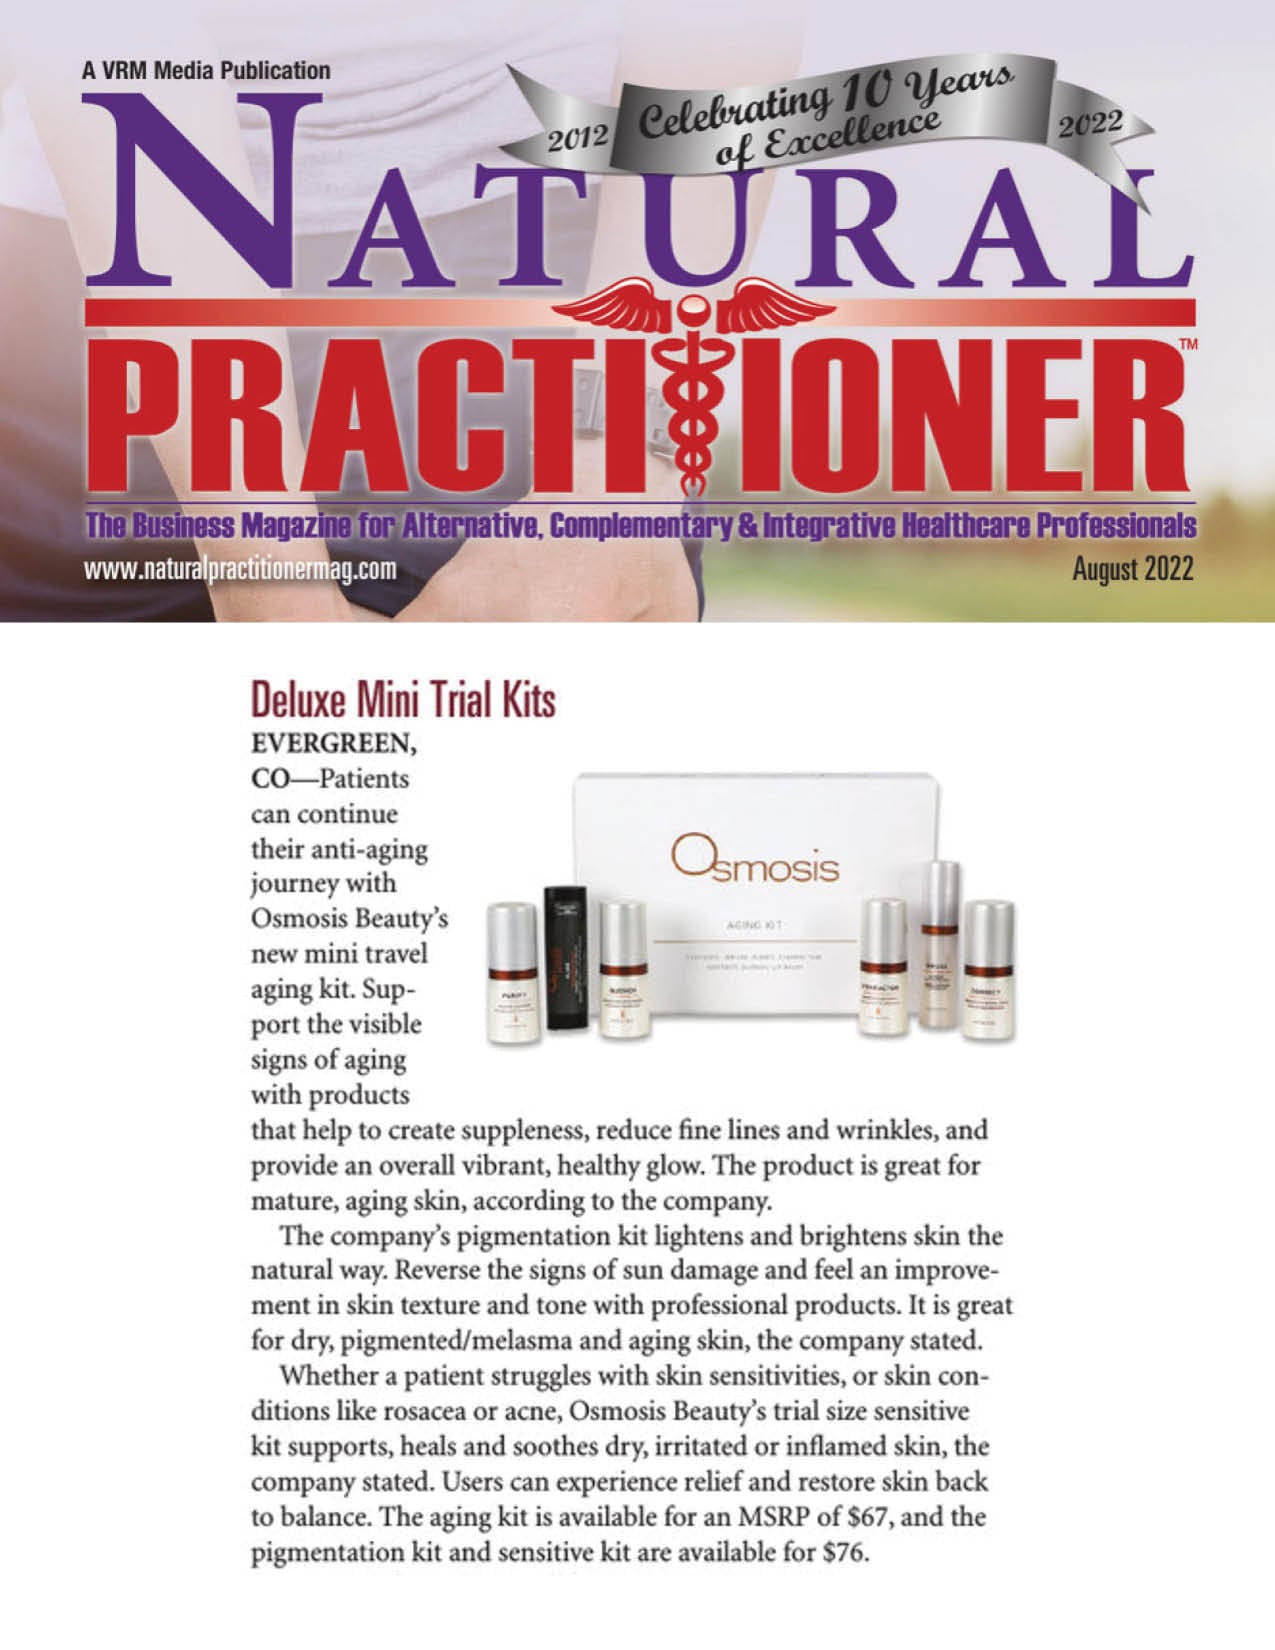 Natural Practitioner Magazine included the Deluxe Trial Kit in their August 2022 print issue, appearing in their Natural Marketplace roundup